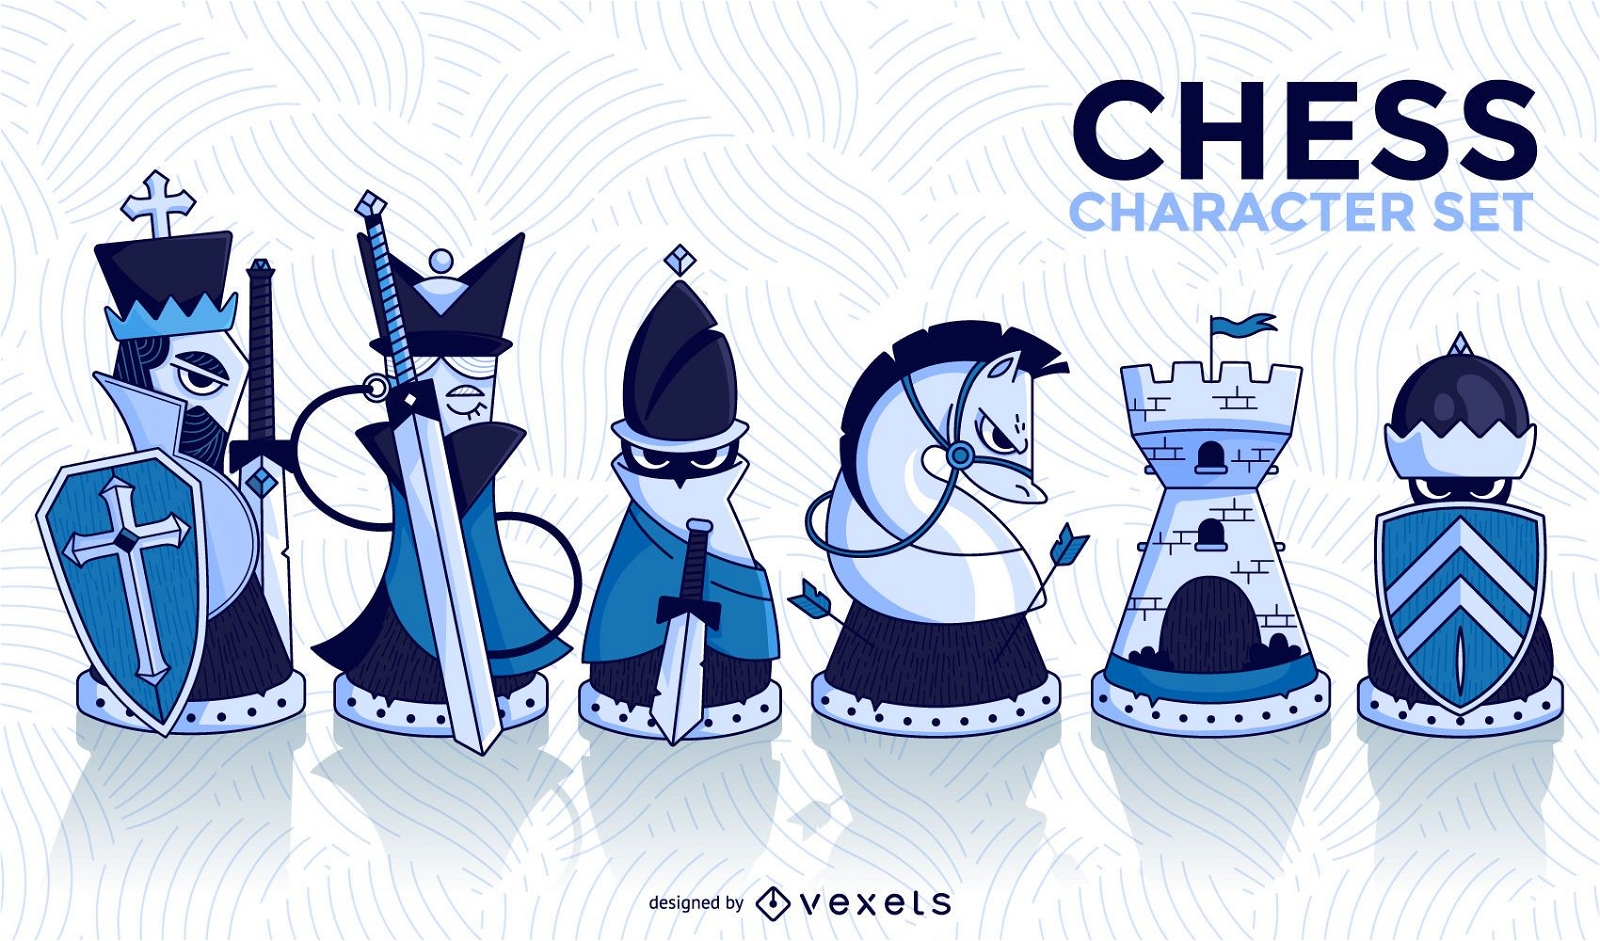 Chess character illustrated set